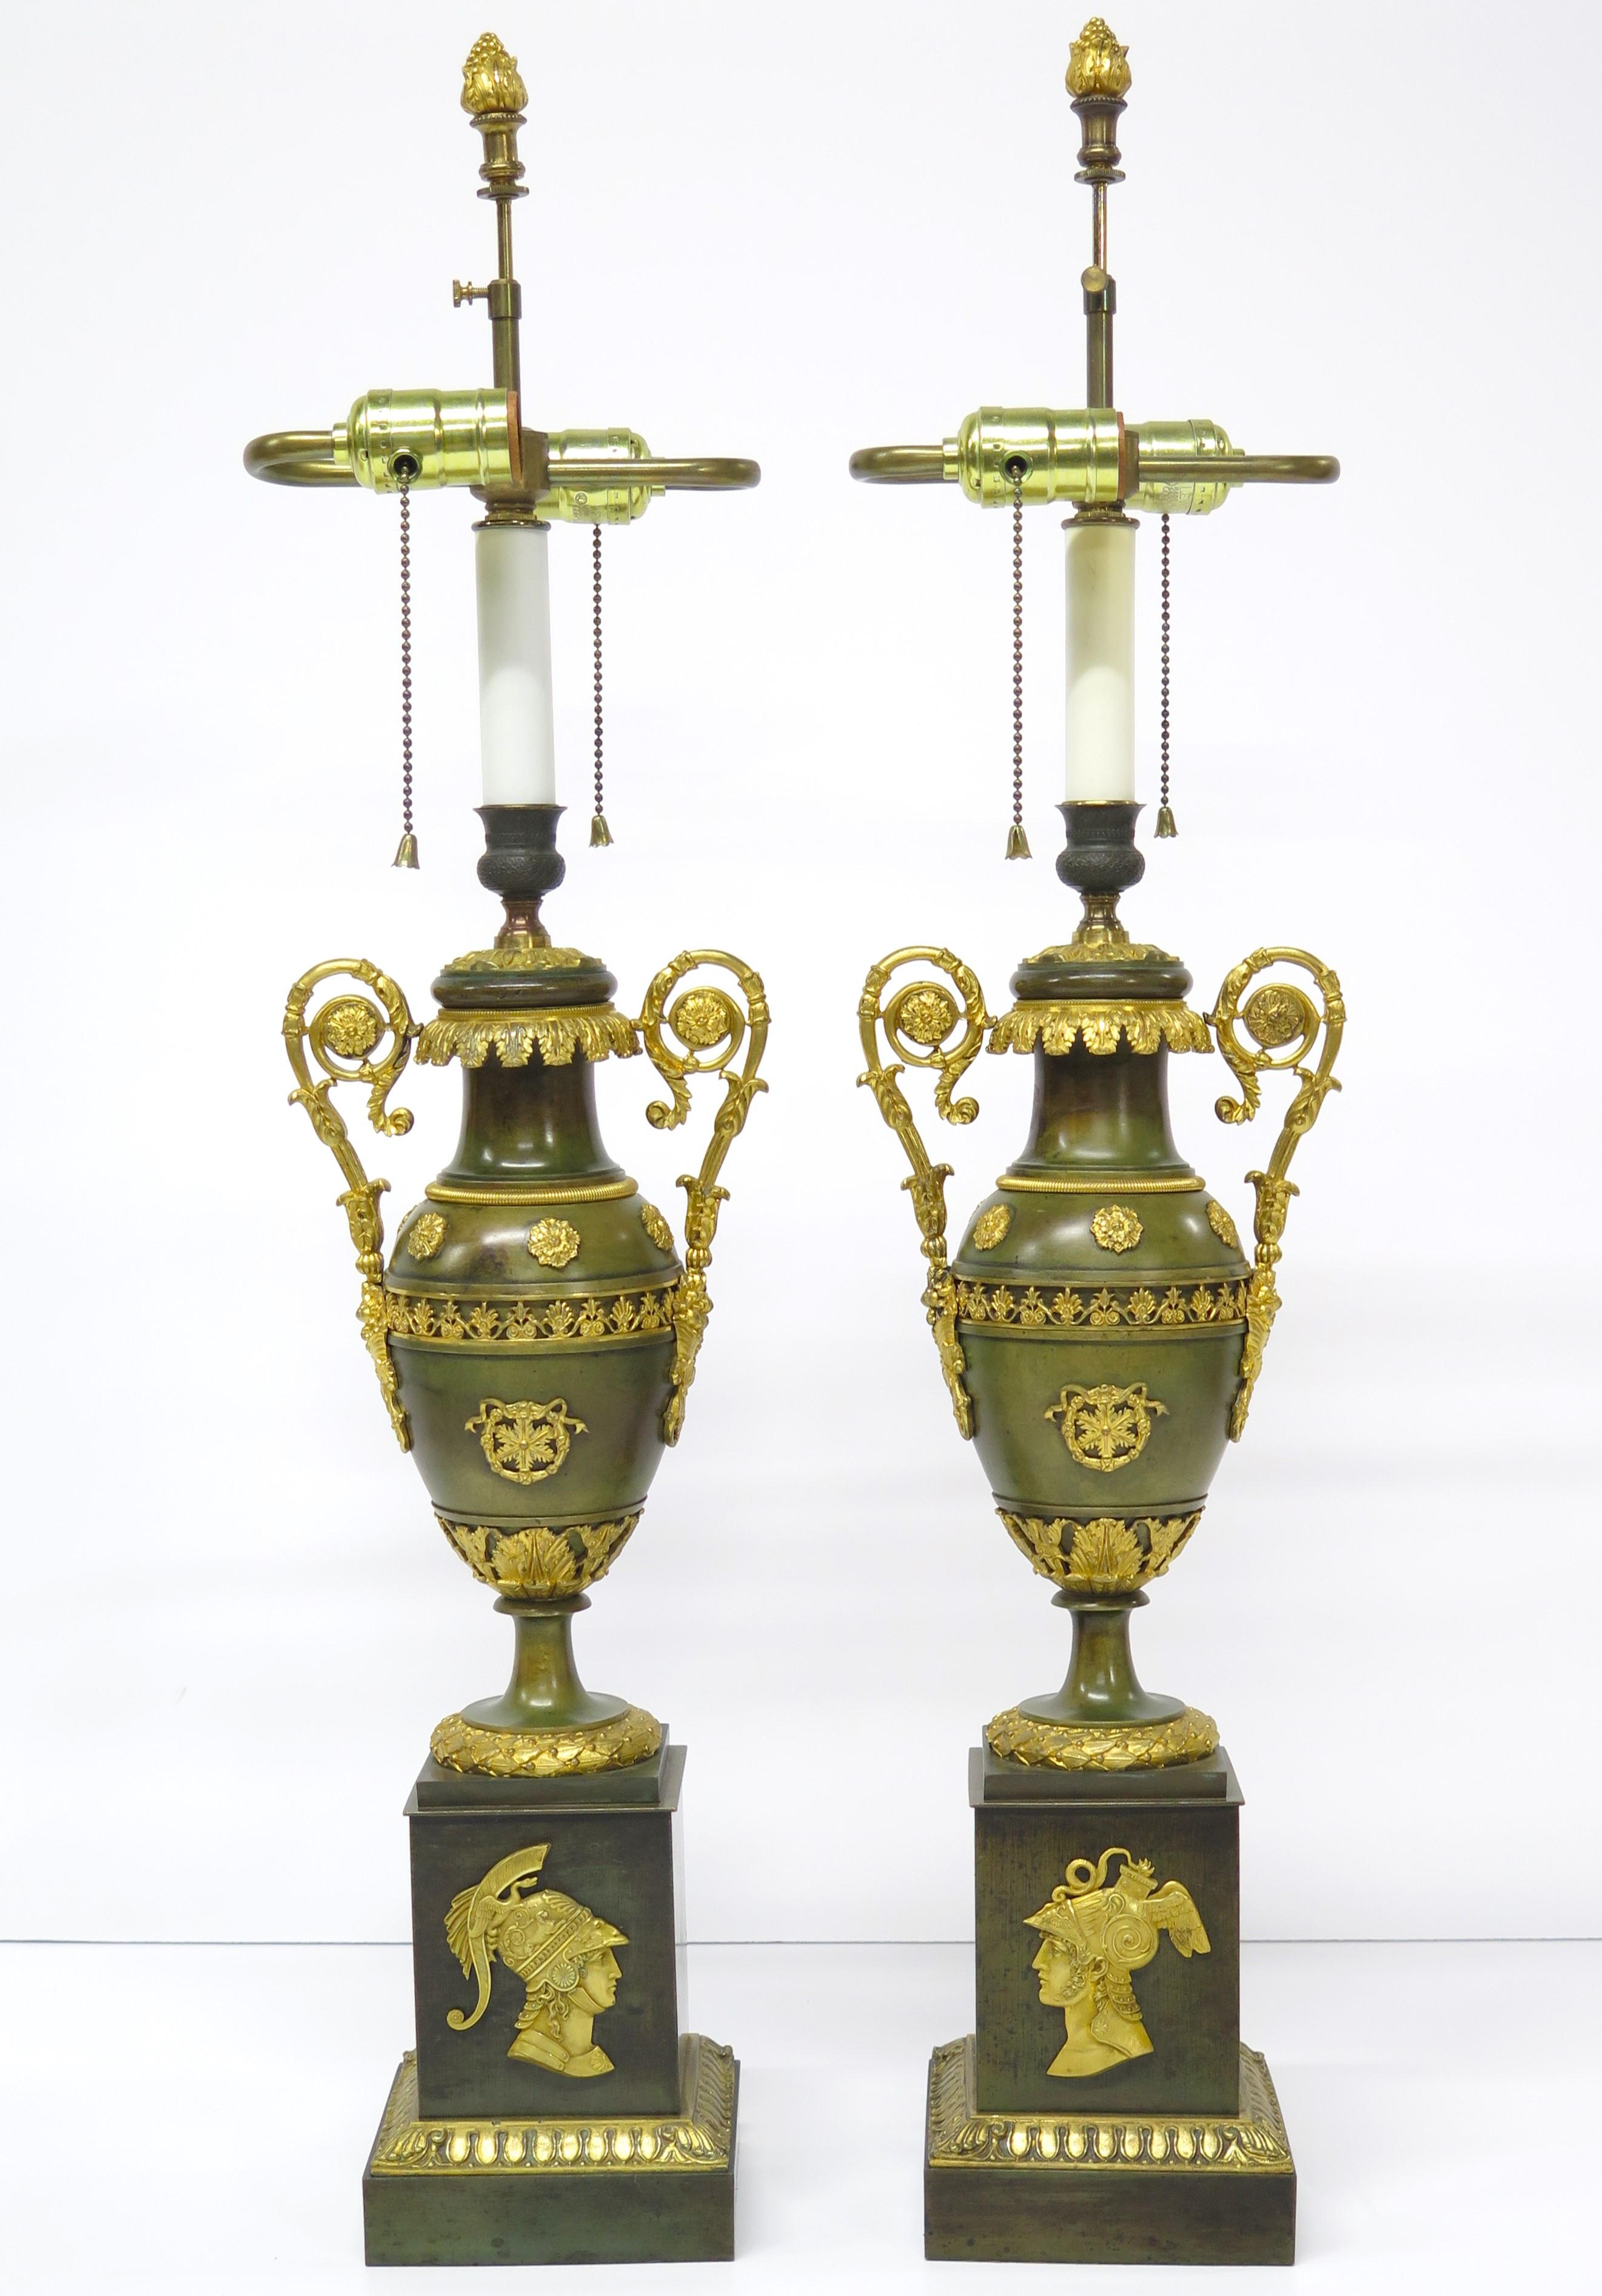 an exquisite French Empire pair of finely cast patinated and gilt bronze cassolettes now as custom lamps, rectangular plinth bases with ormolu / gilt bronze bas relief portrait profiles of Mars (Roman) and Perseus (Greek), support slender elegant